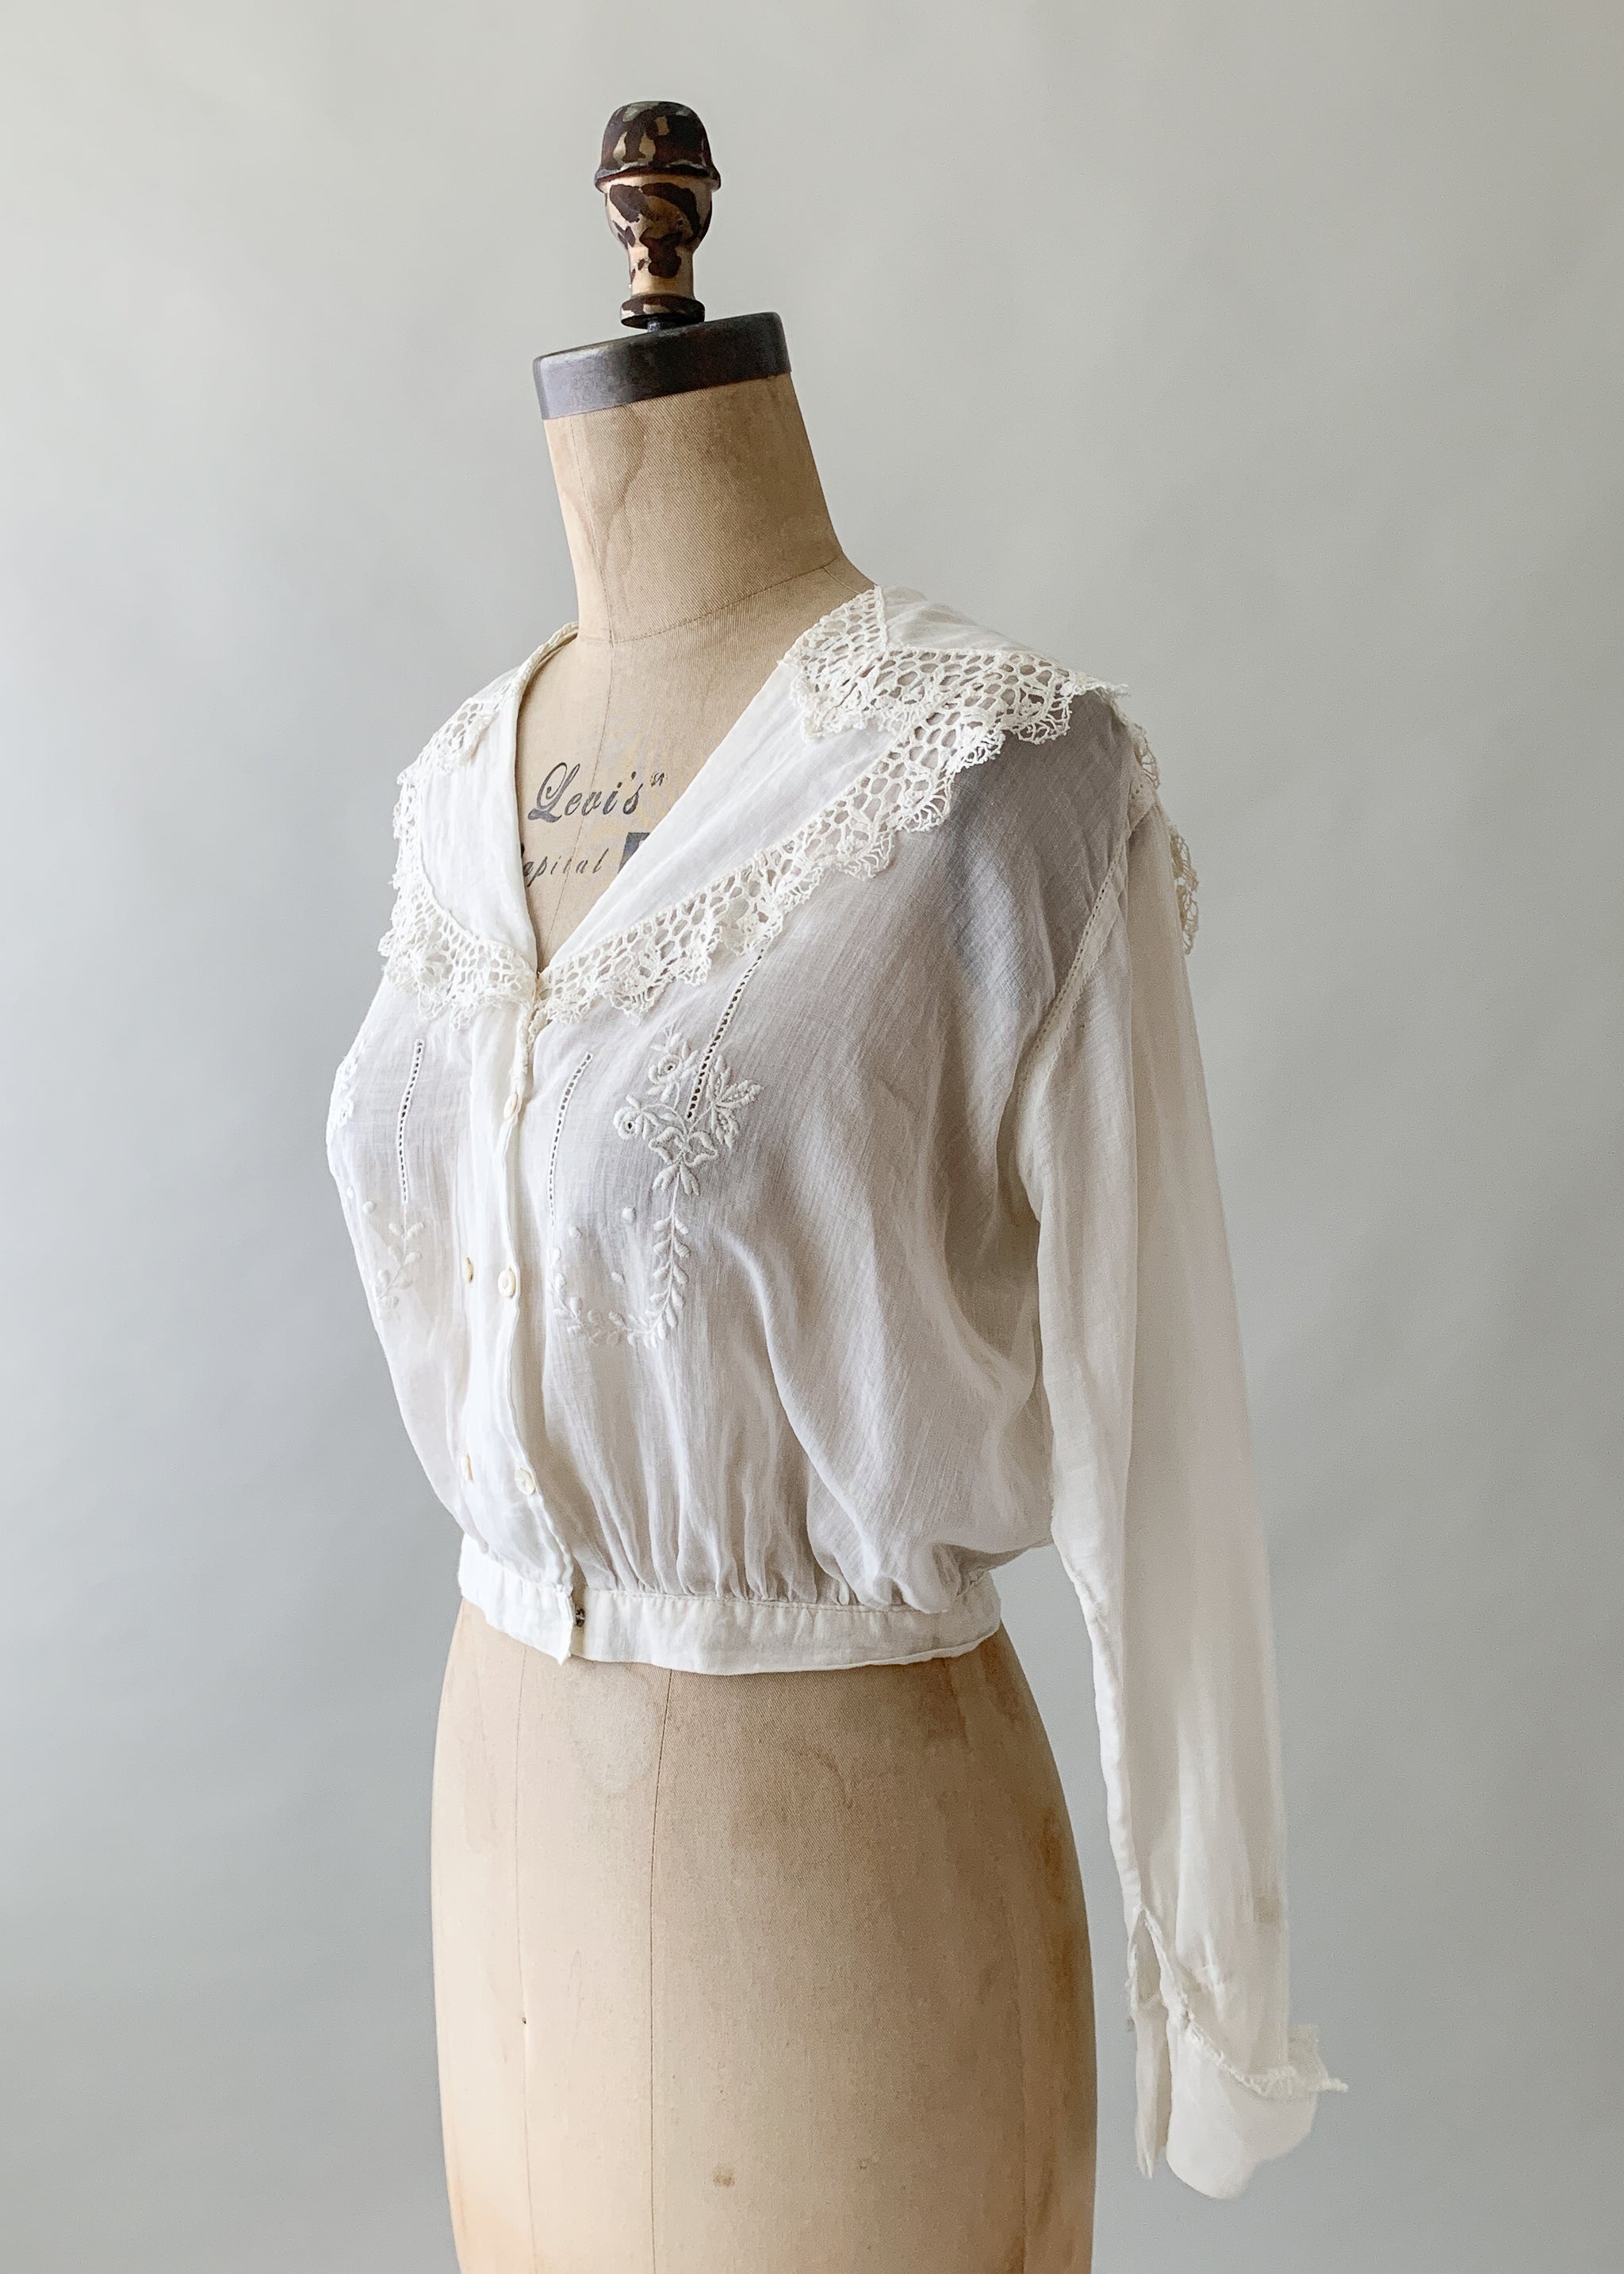 Antique Edwardian Embroidered Cotton Blouse - Raleigh Vintage